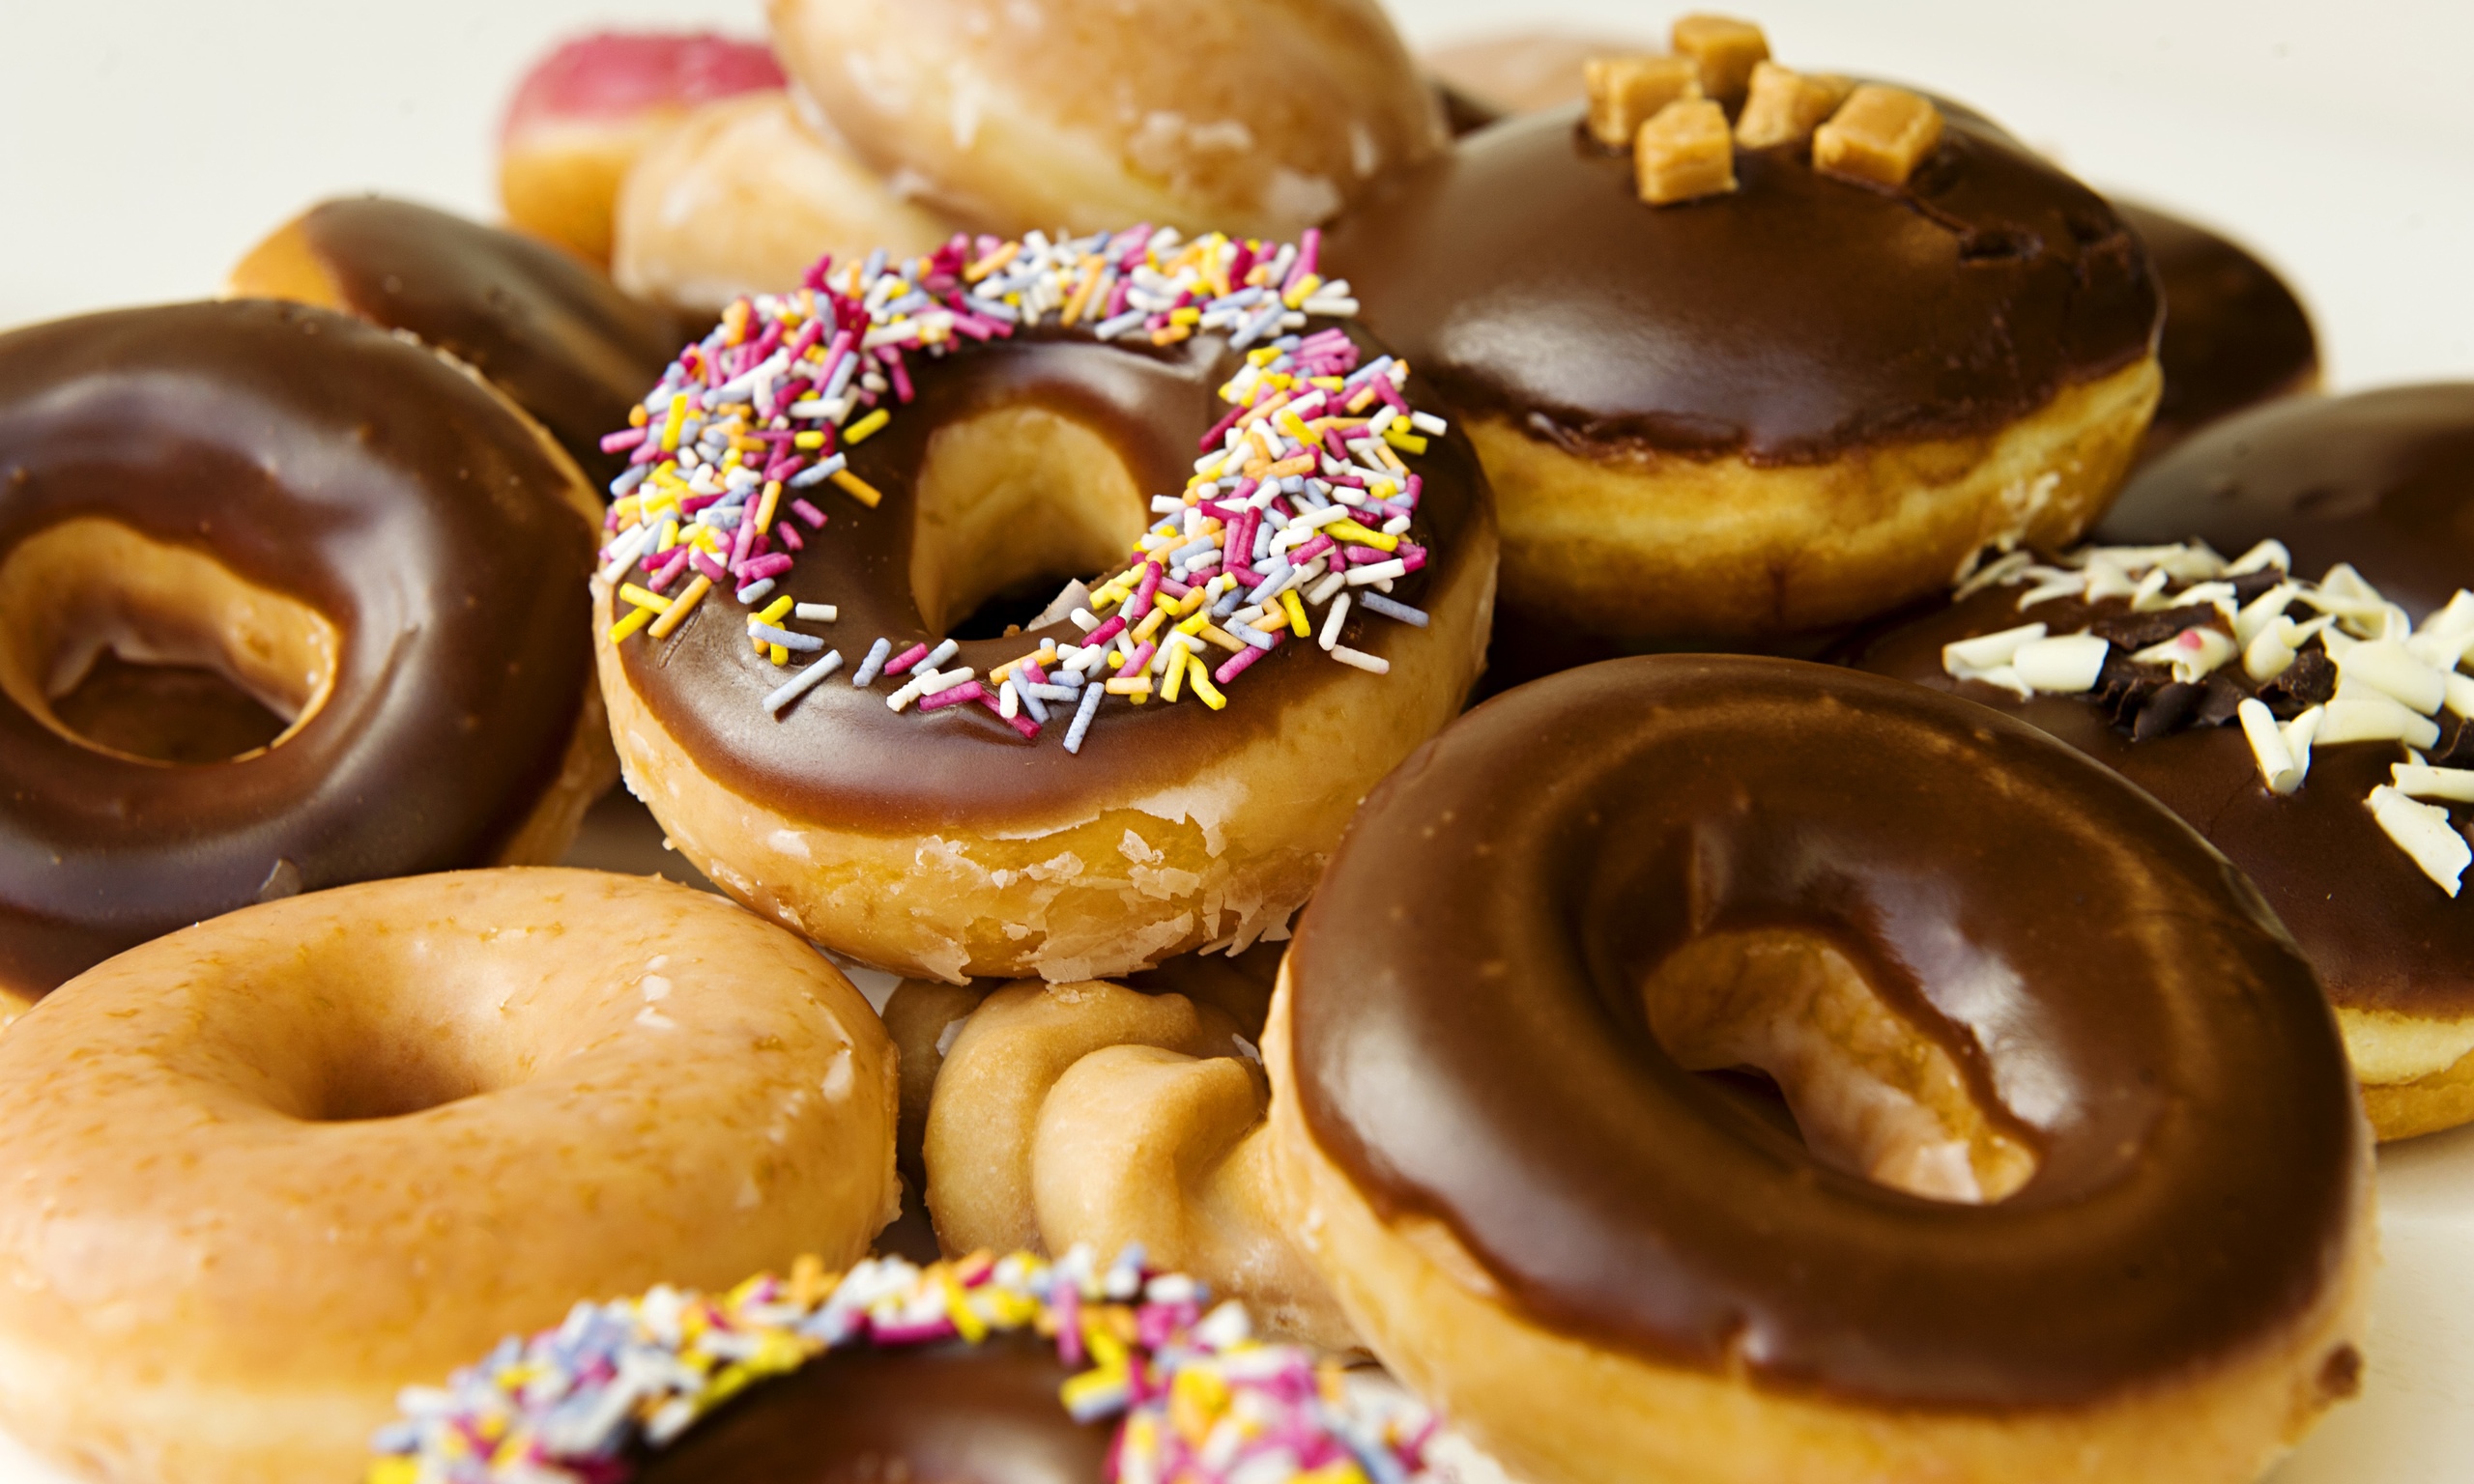 Dunkin’ Donuts is back in the UK. But is it filling the hole? | Arwa